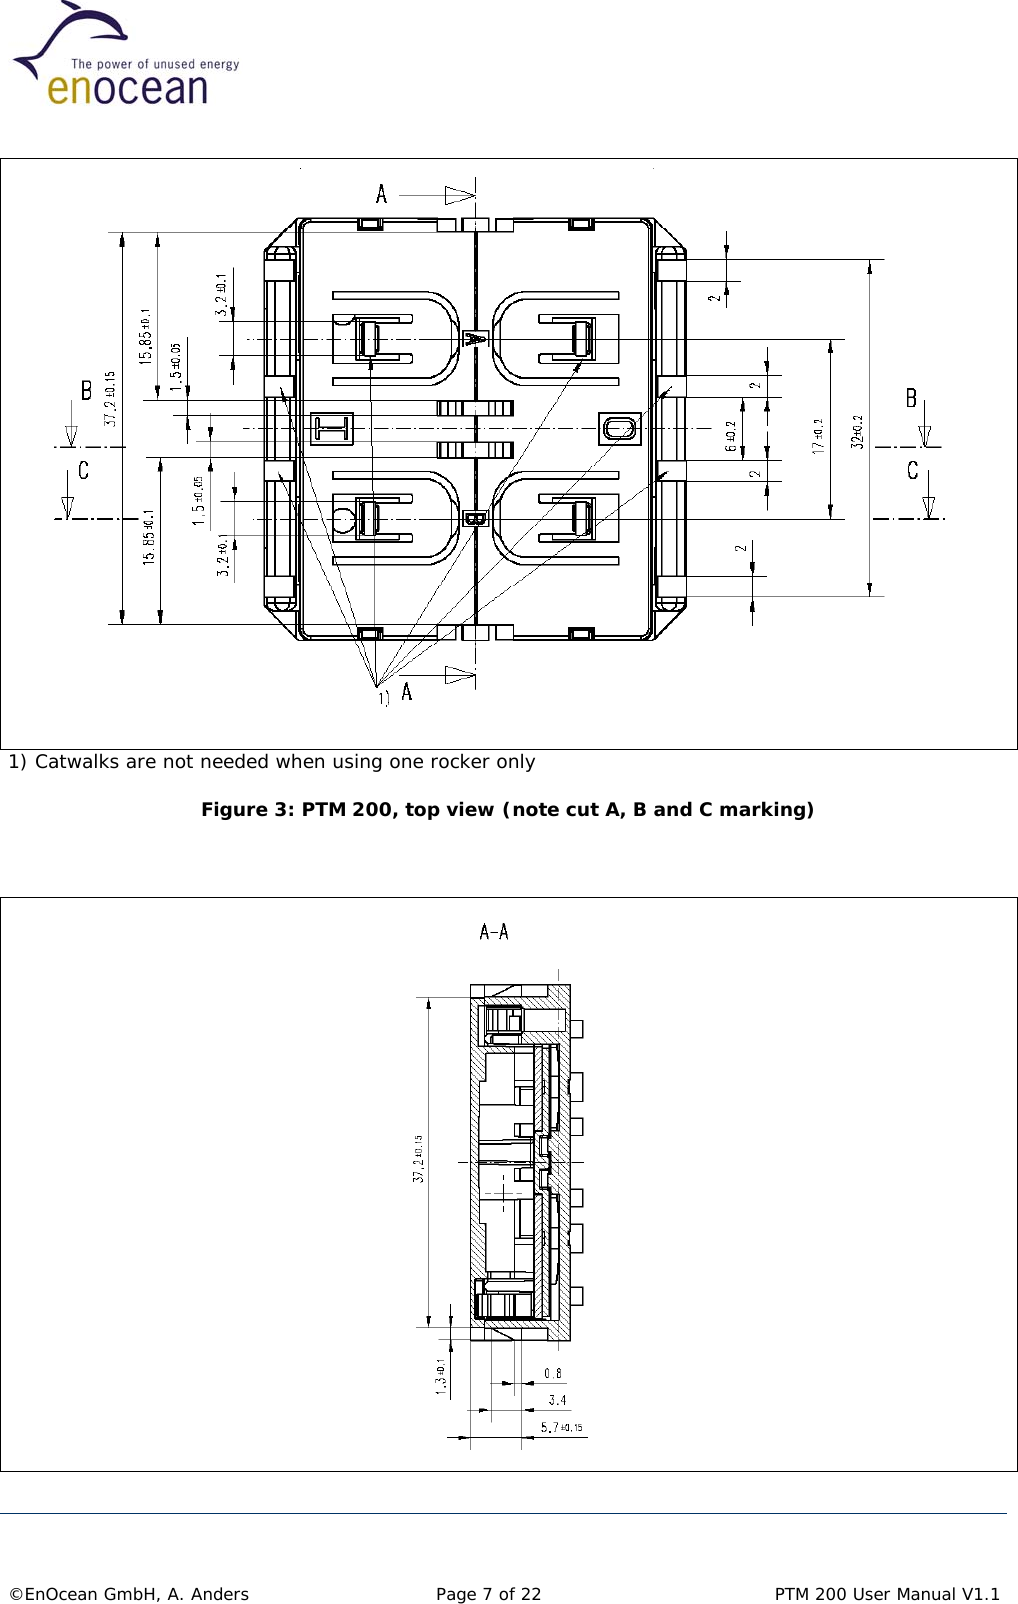     1) Catwalks are not needed when using one rocker only  Figure 3: PTM 200, top view (note cut A, B and C marking)           ©EnOcean GmbH, A. Anders   Page 7 of 22    PTM 200 User Manual V1.1  